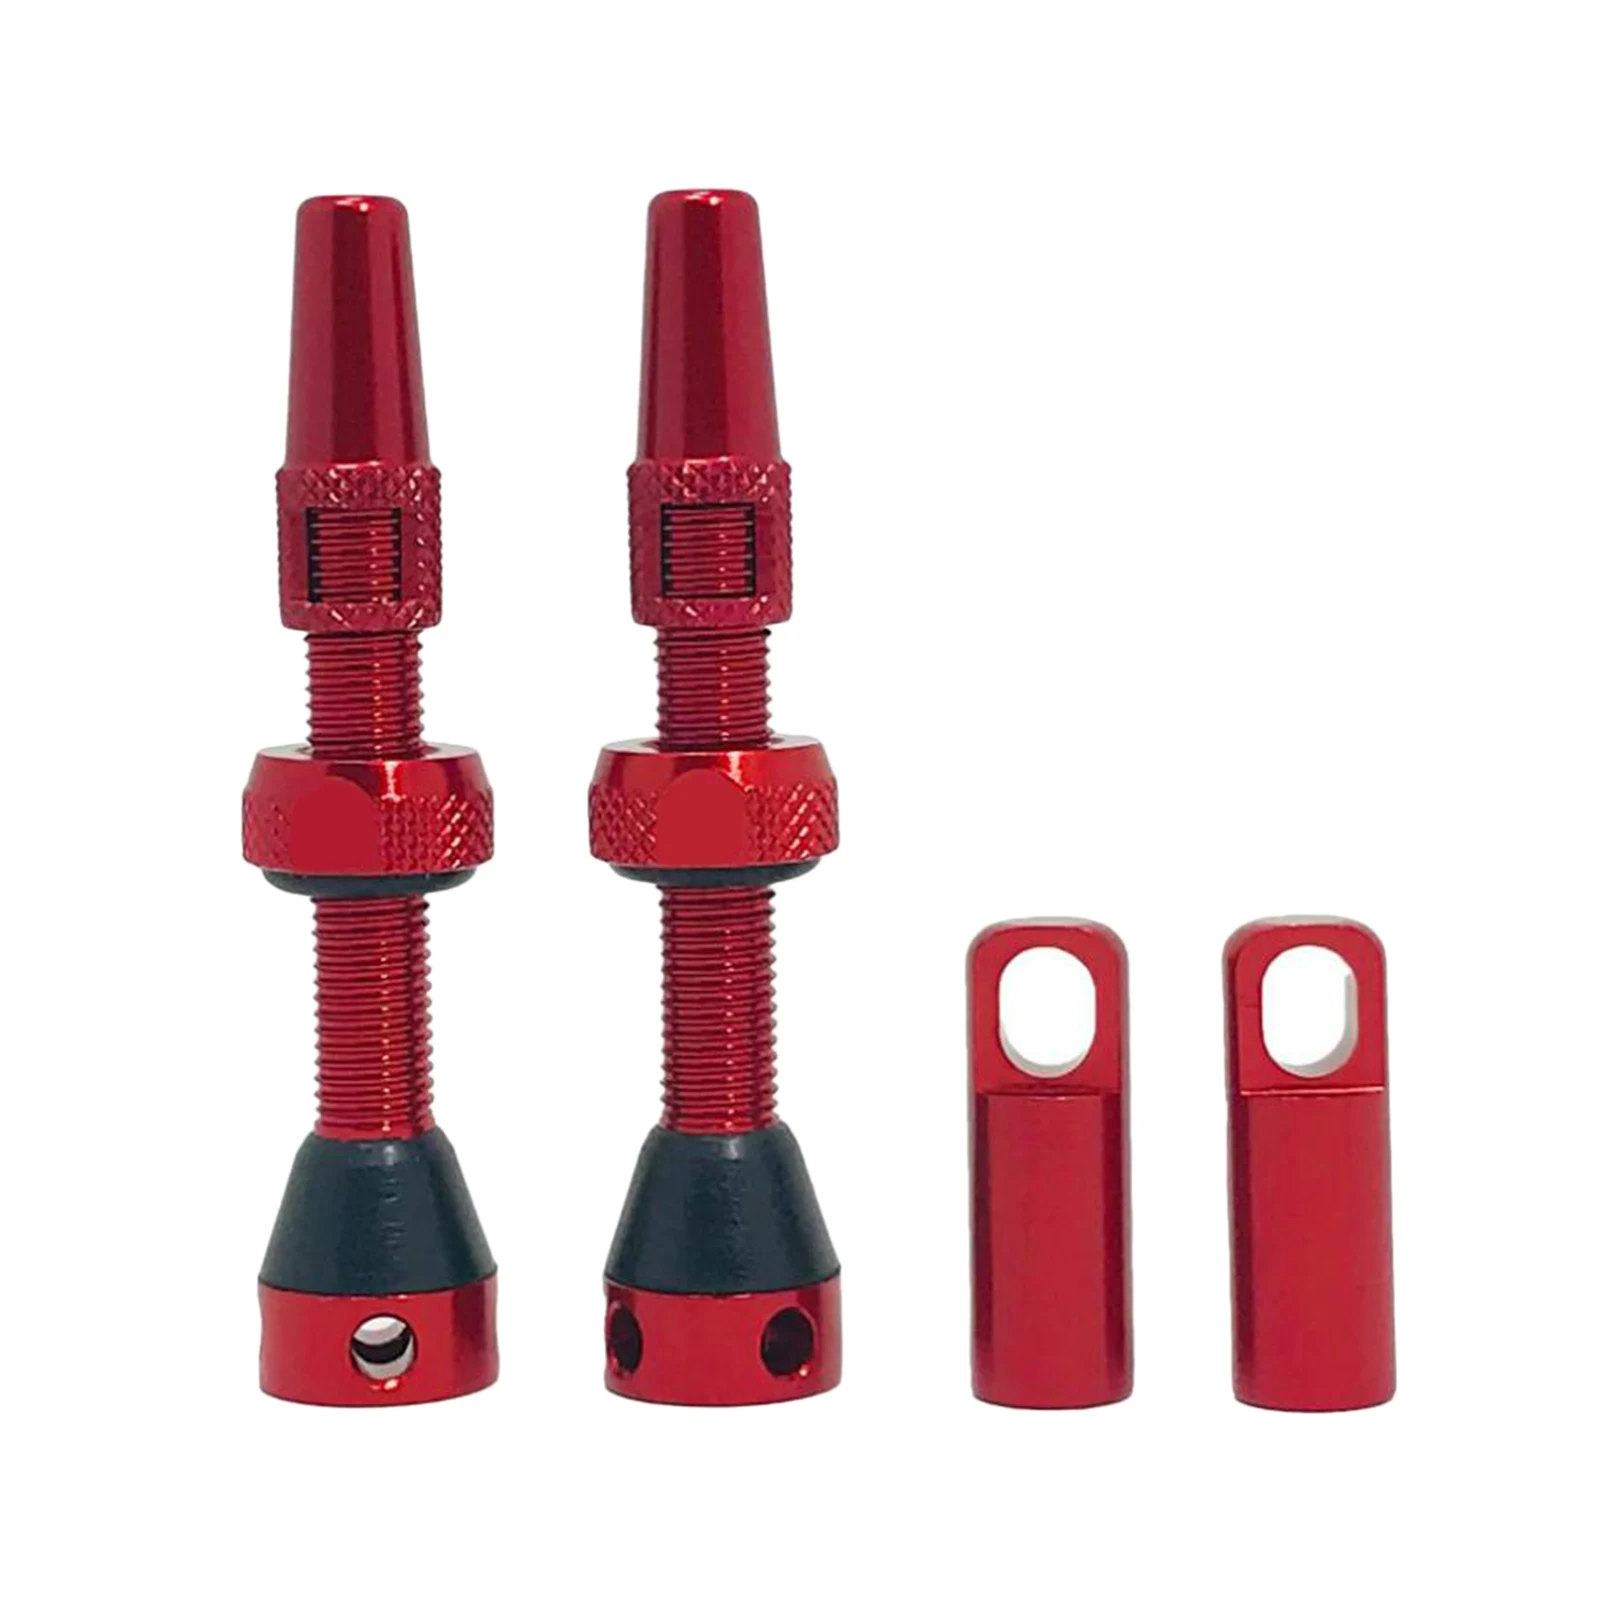 Valve Stem Cores Replacement Removal Tool for Bicycle Bike Tubeless Red